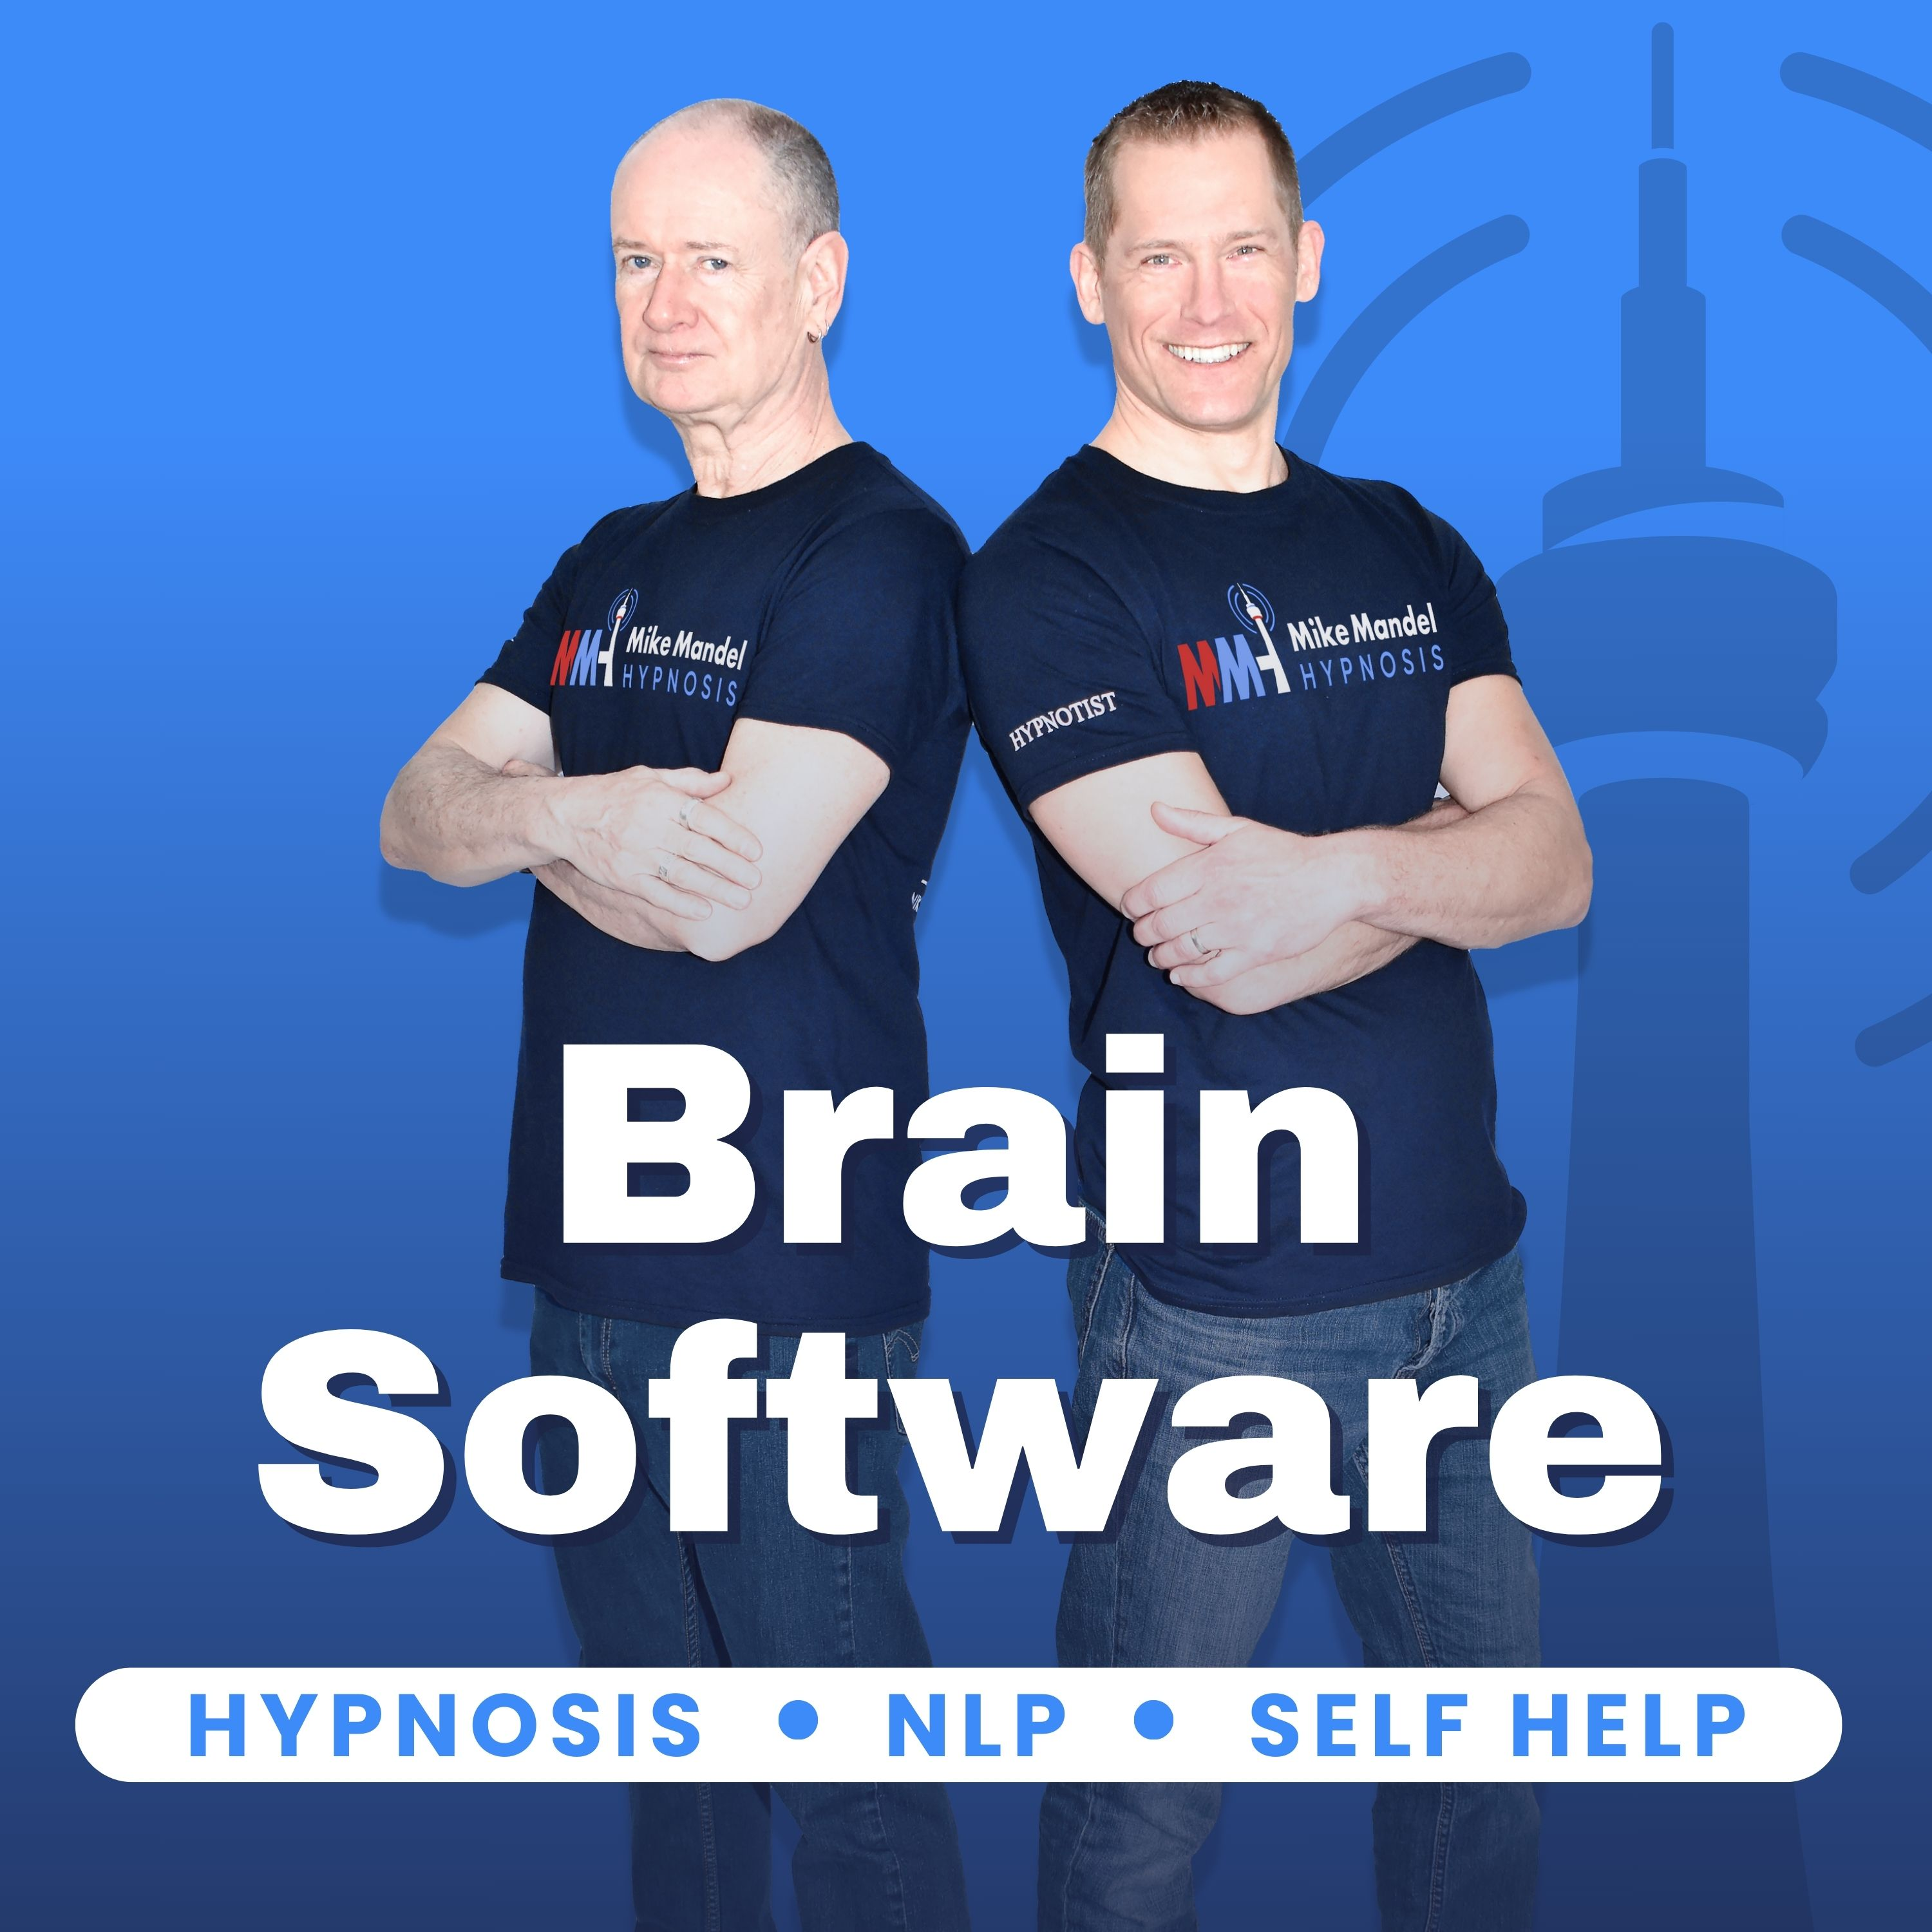 Brain Software with Mike Mandel